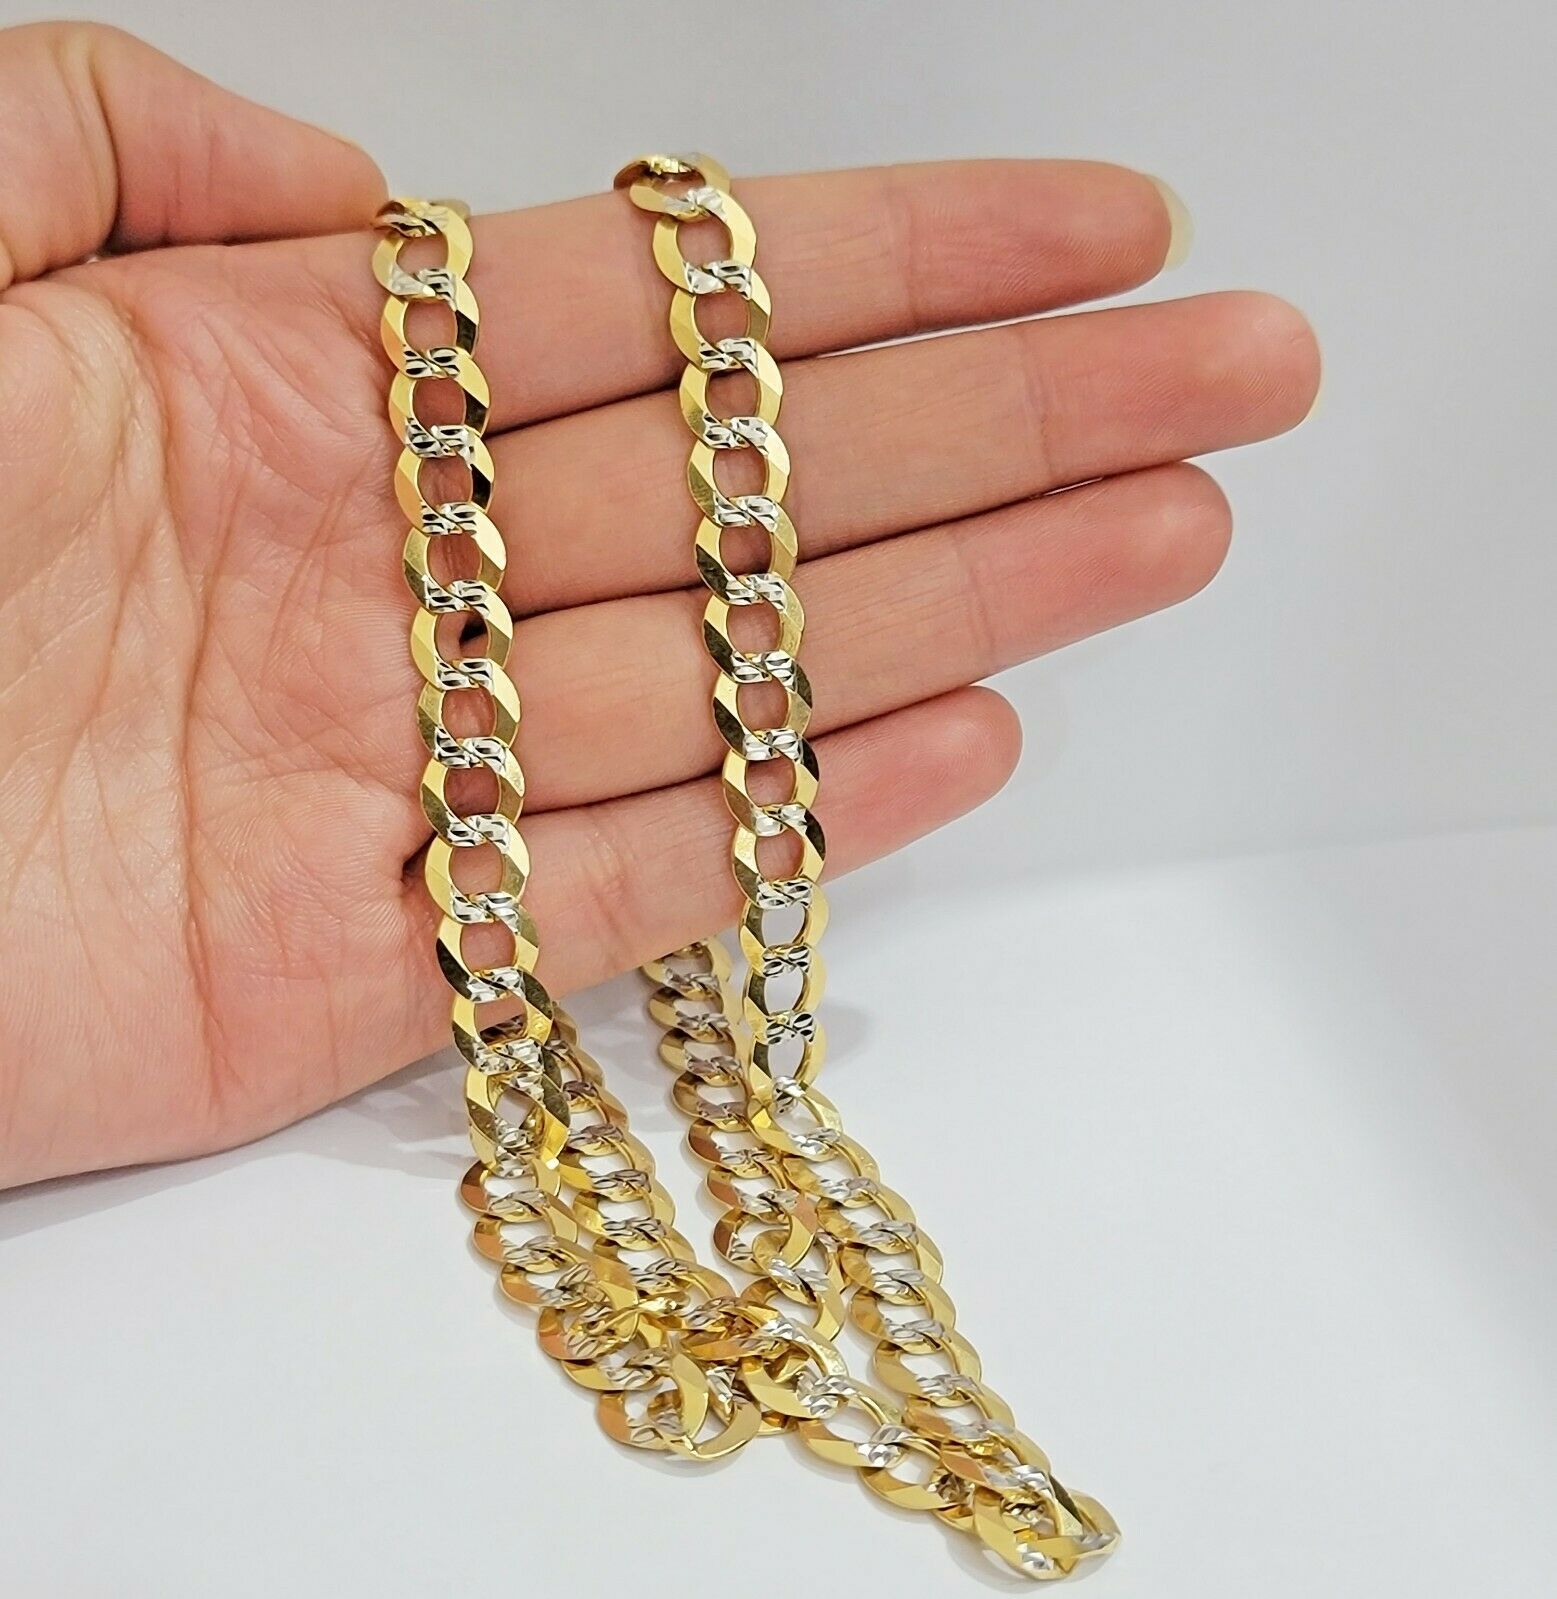 Real 10k Gold Mens Necklace Cuban Curb Link 9mm 24" Inch Diamond Cut SOLID Chain